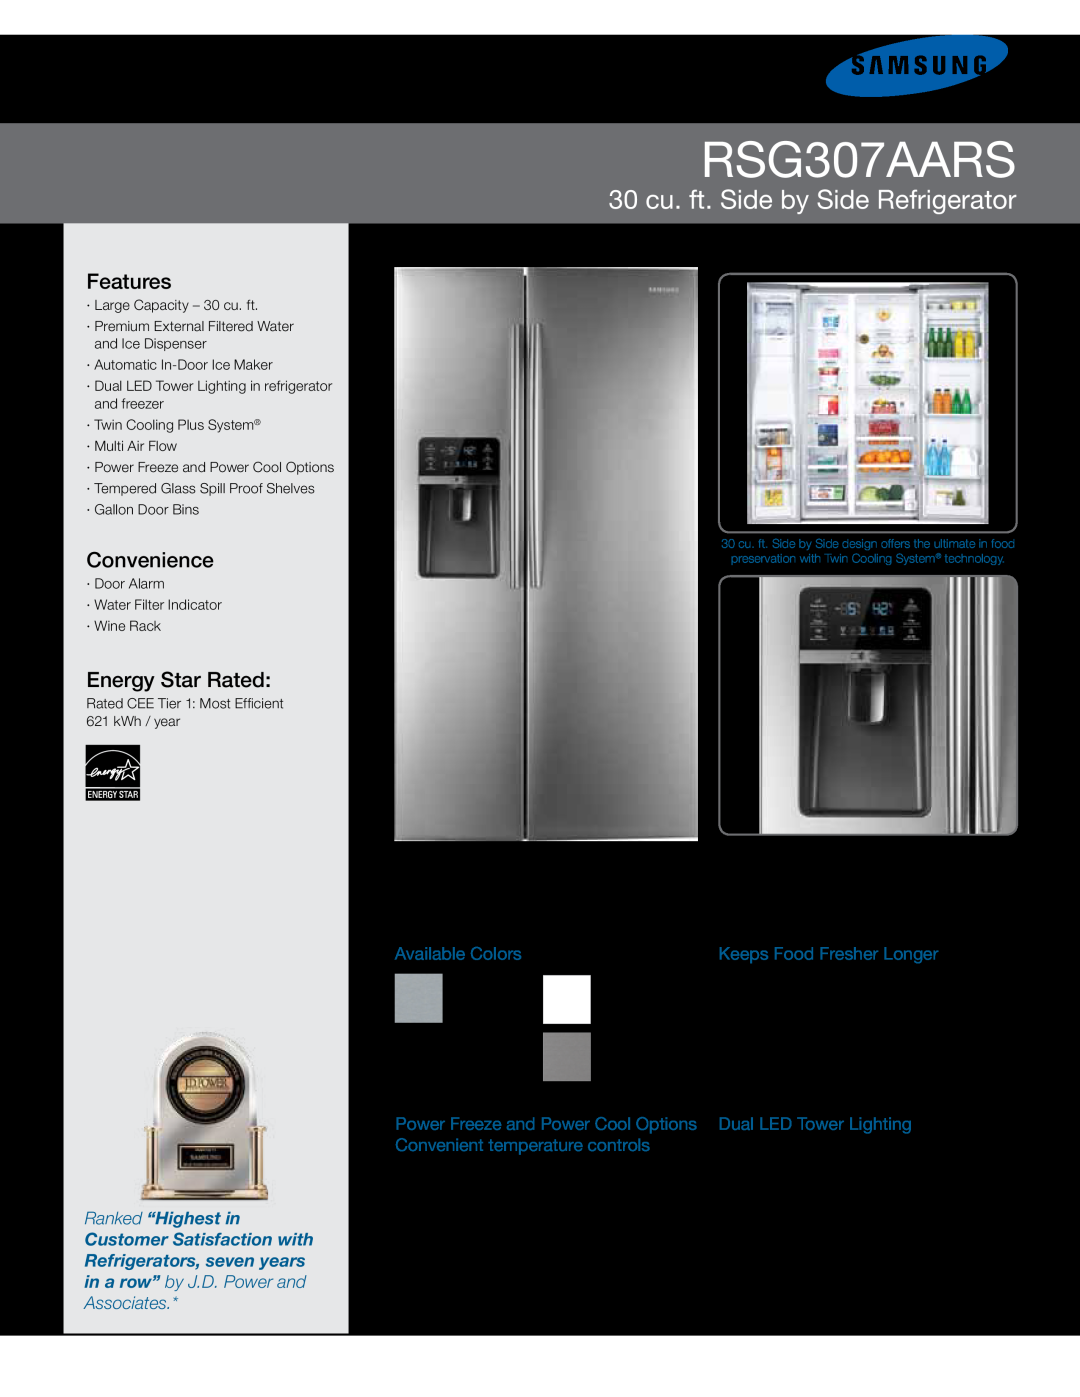 Samsung RSG307AARS manual 30 cu. ft. Side by Side Refrigerator, Features, Convenience, Energy Star Rated, Available Colors 